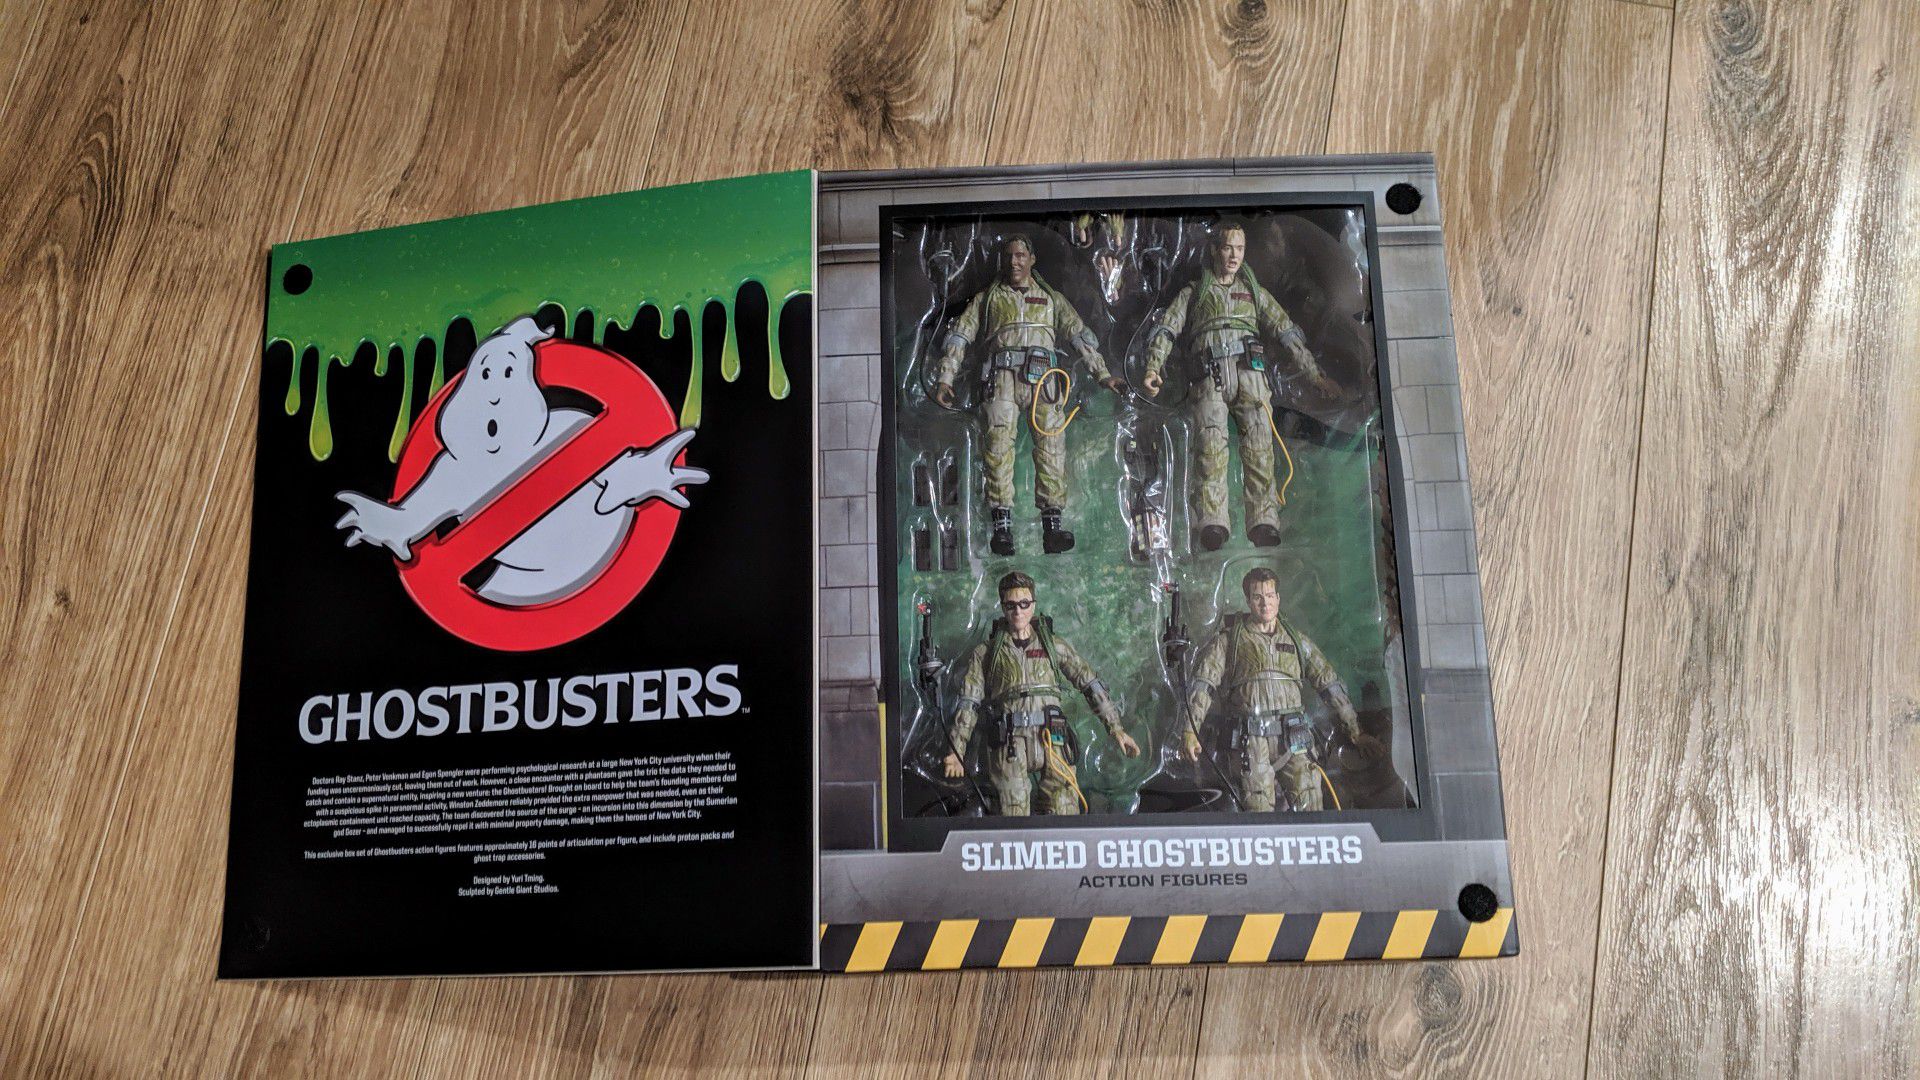 SDCC 2019 Exclusive Limited Ghostbusters. In-hand. 1984 pieces ever made!